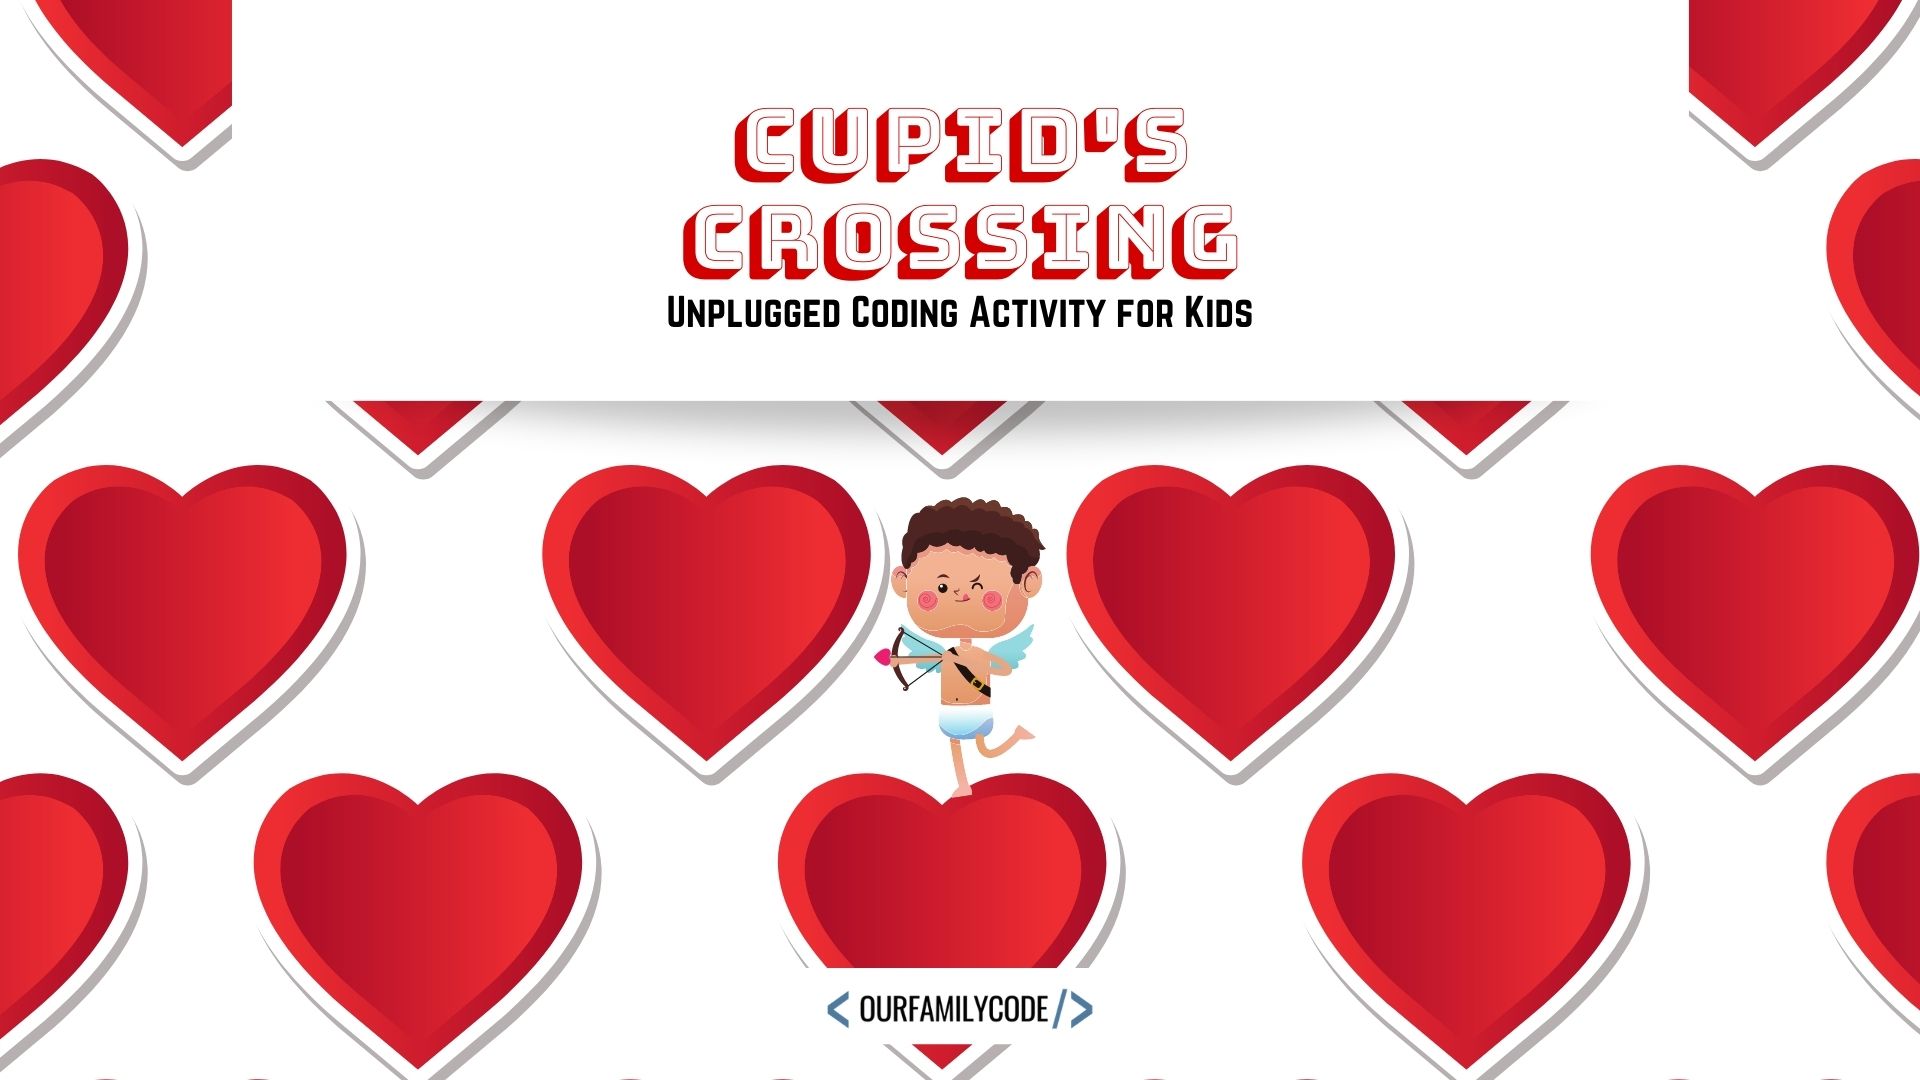 Find the correct sequence to help Cupid make his way through town in this unplugged coding worksheet for kids! #teachkidstocode #freeworksheets #codingactivitiesforkids #STEM #STEAM #unpluggedcoding #hourofcode